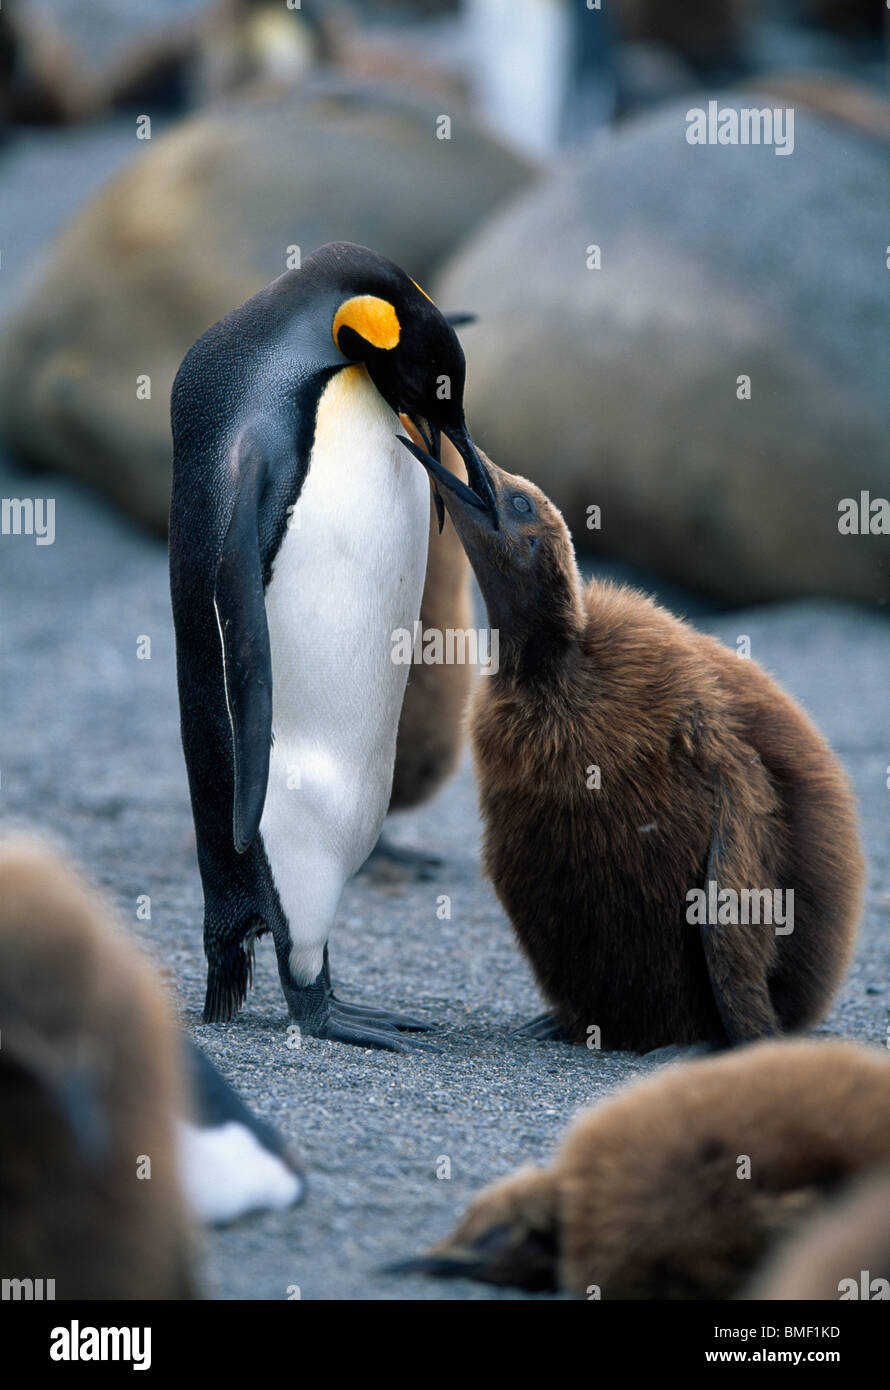 King penguin regurgitating fish to feed chick, St Andrew's Bay, South Georgia Stock Photo